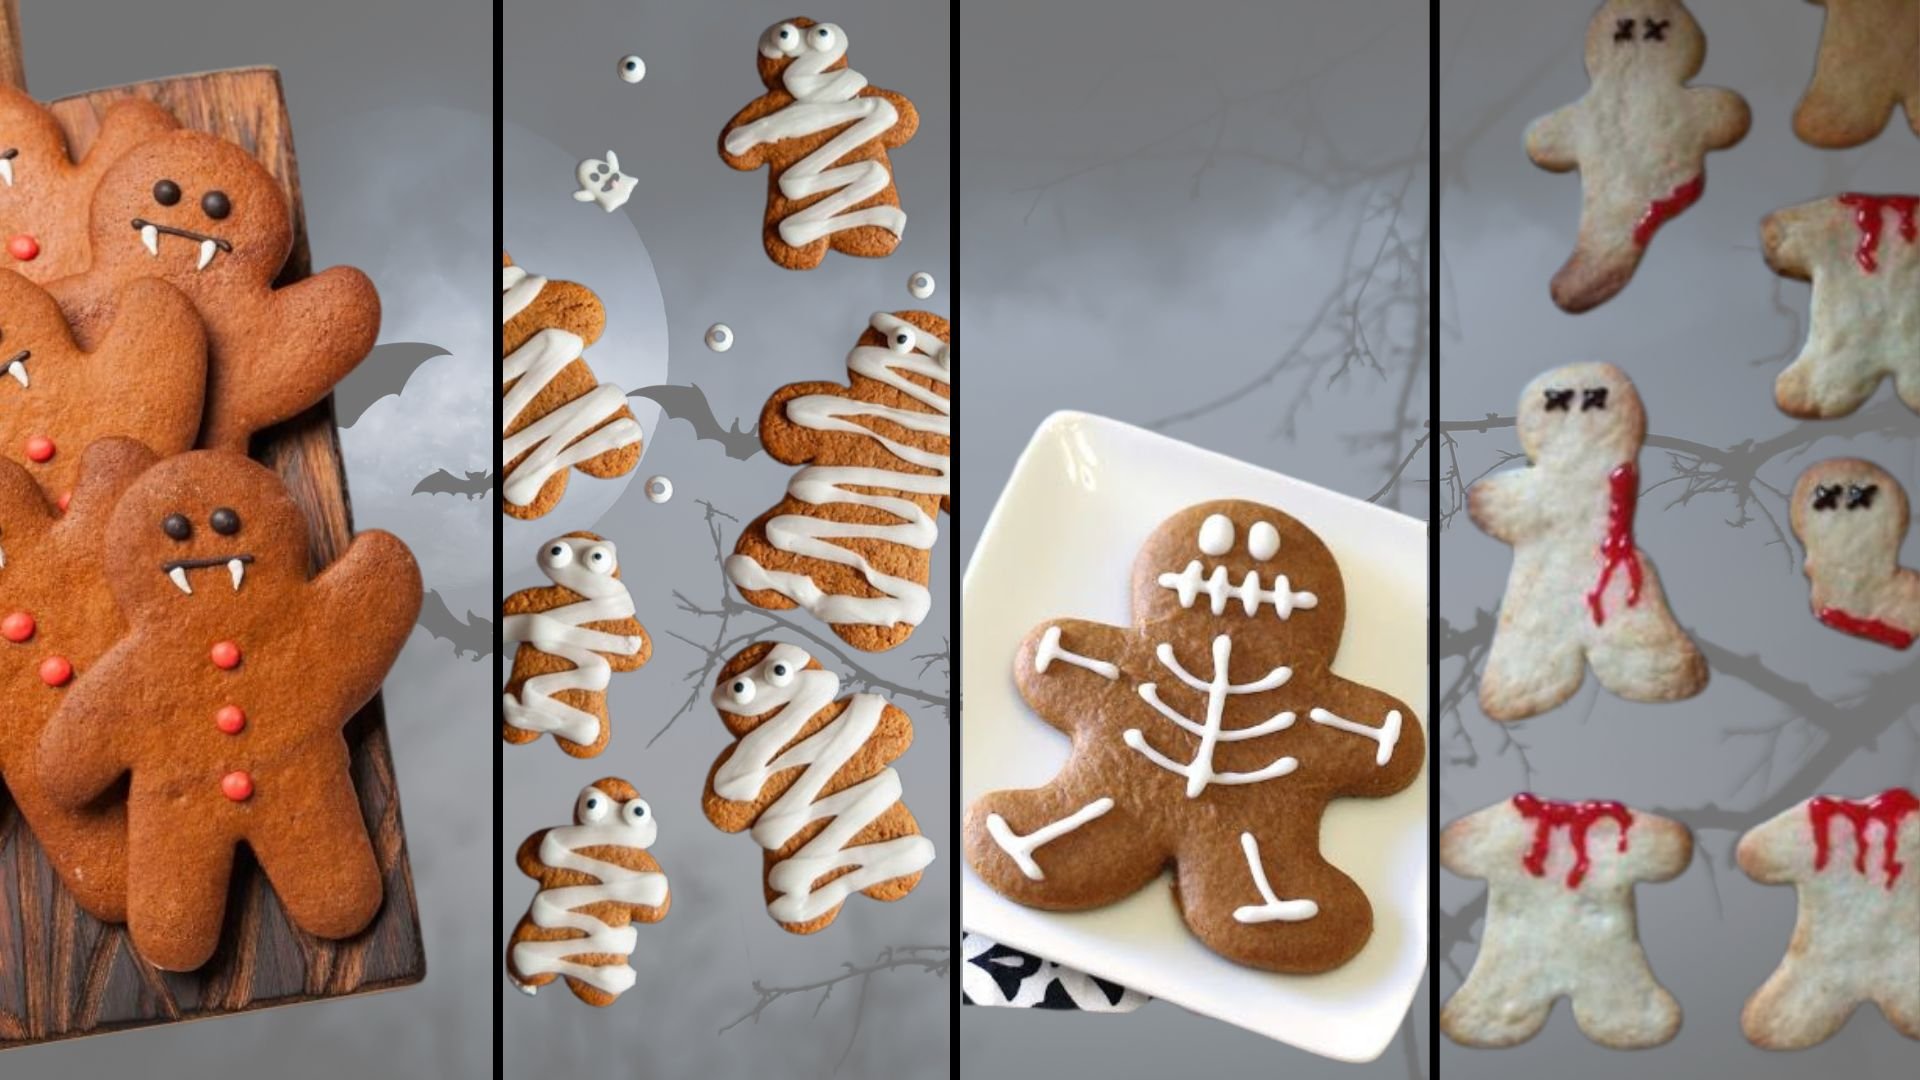 Halloween options are endless when it comes to Gingerbread Men. Try vegan vampires, gingerbread mummies, skeletons, or even gruesome dismembered gingerbread men.